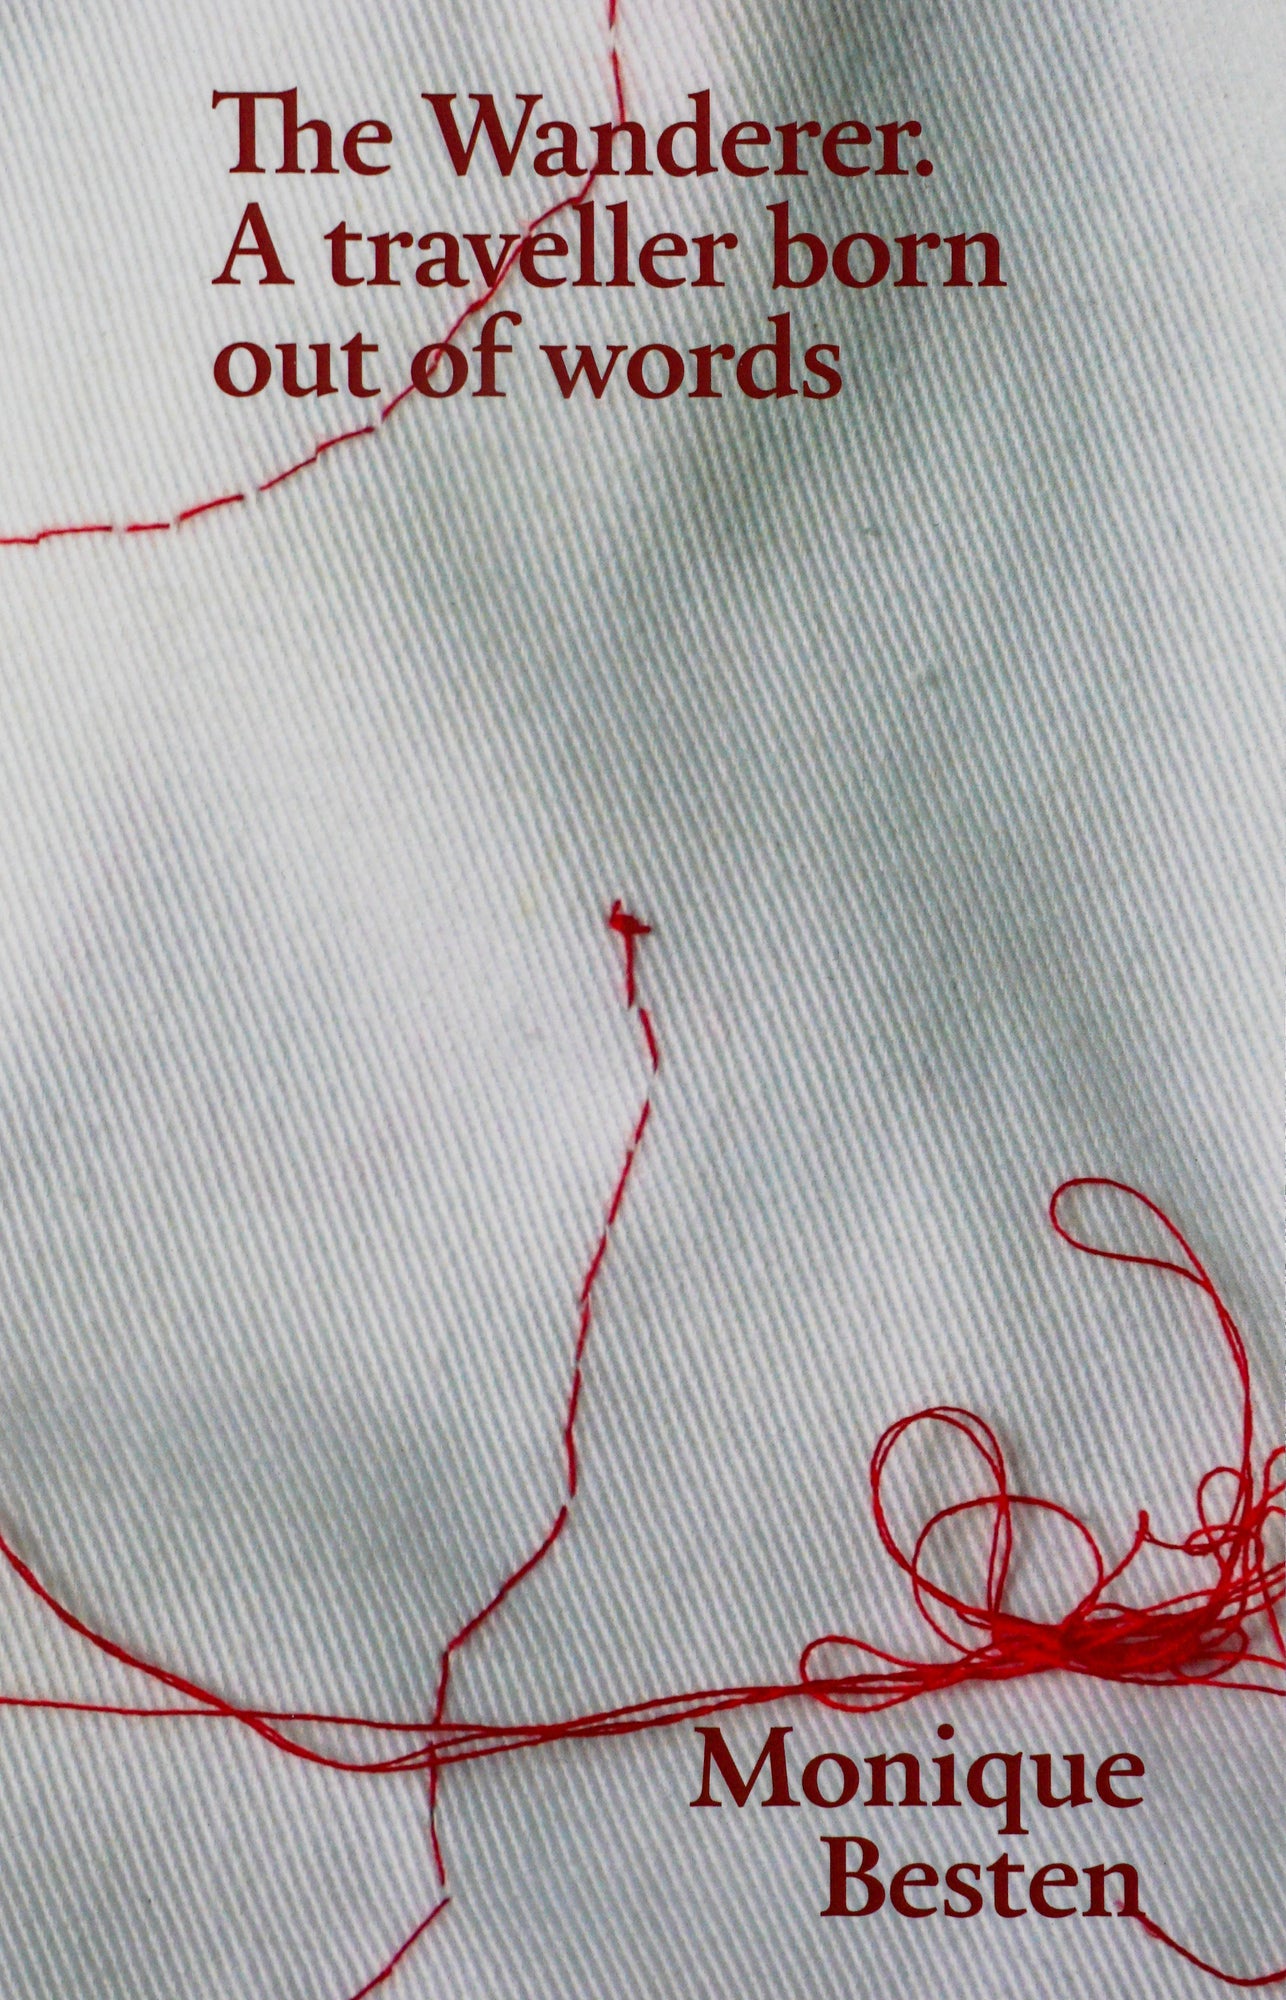 Grey and white backdrop of a piece of fabric zoomed in and red thread embroidery with The Wanderer A traveller born our of words Monique Besten in deep red serif type